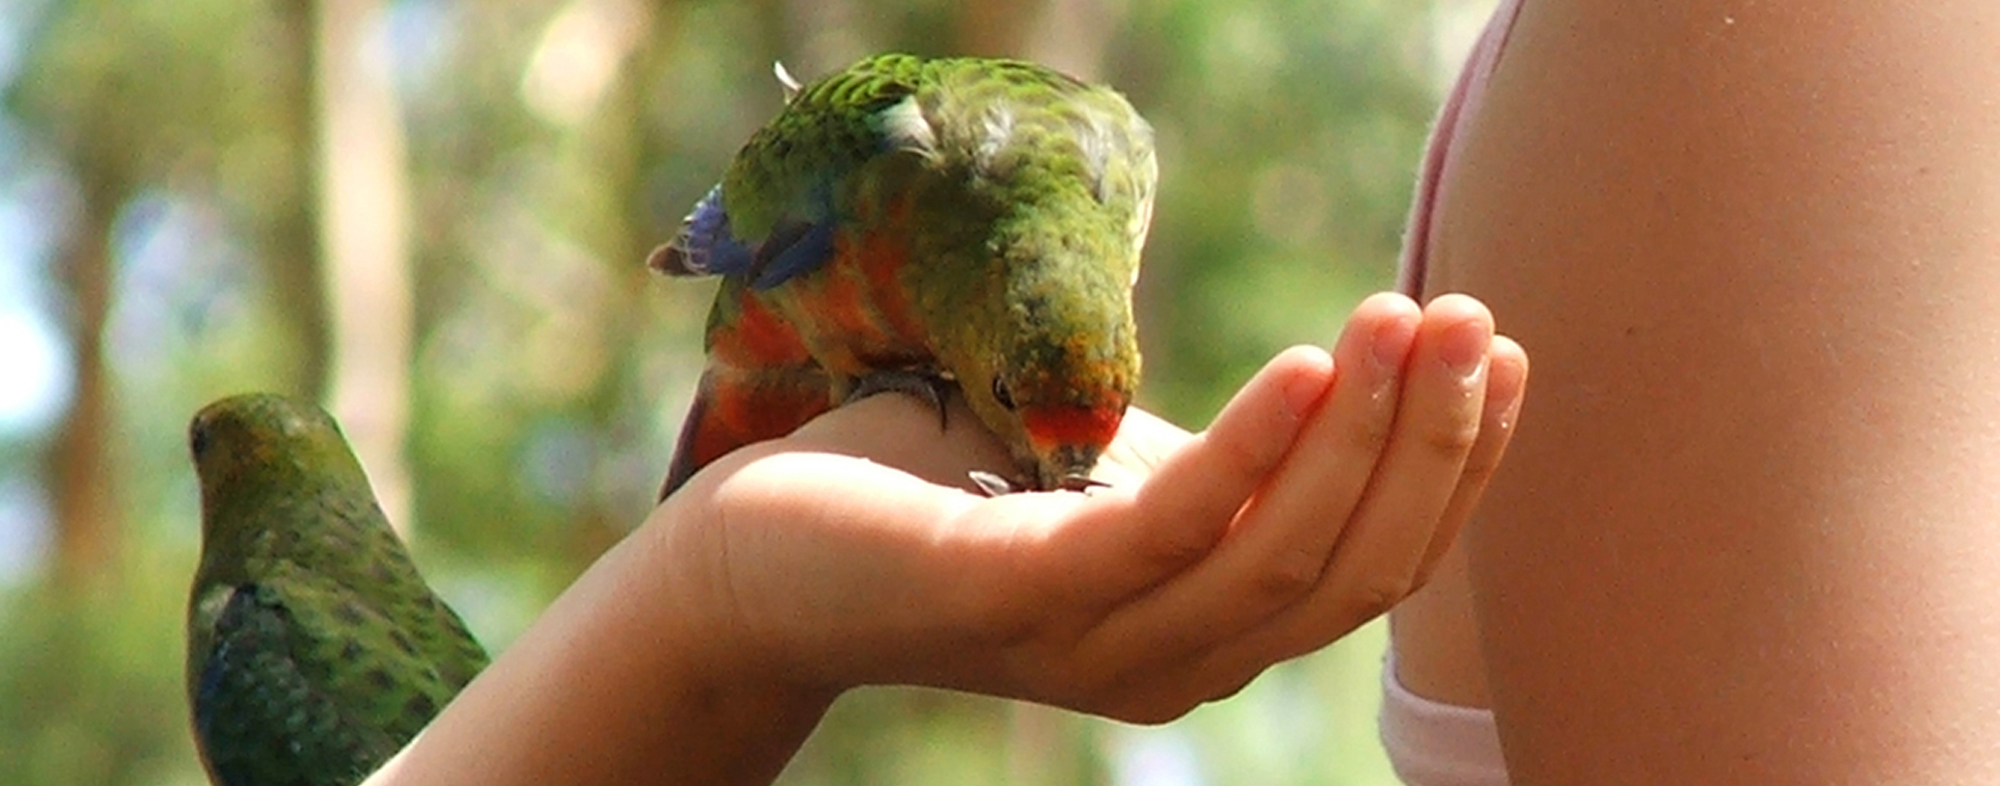 Human training a pet bird to eat out of their hand